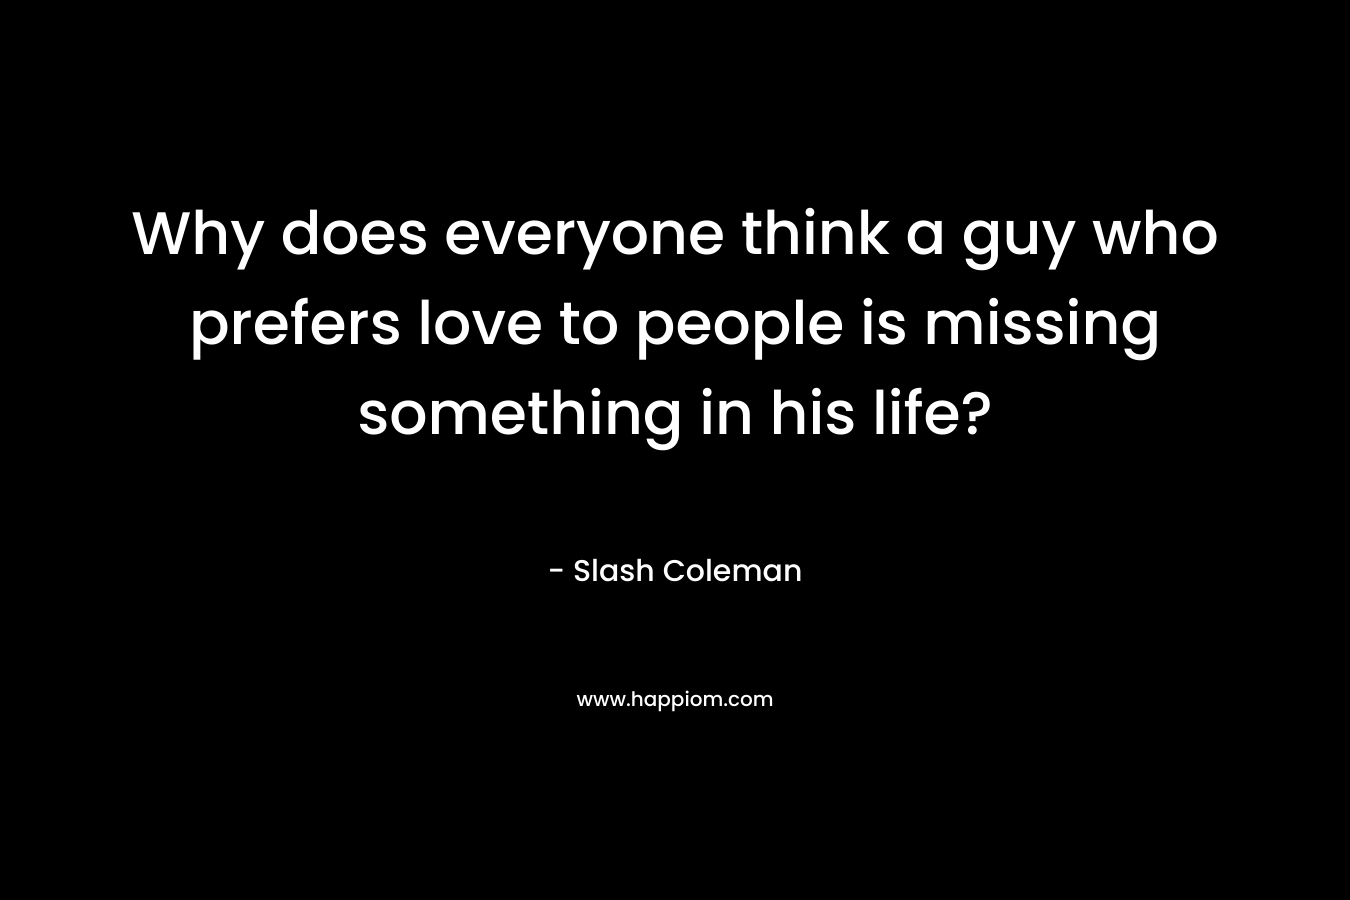 Why does everyone think a guy who prefers love to people is missing something in his life?